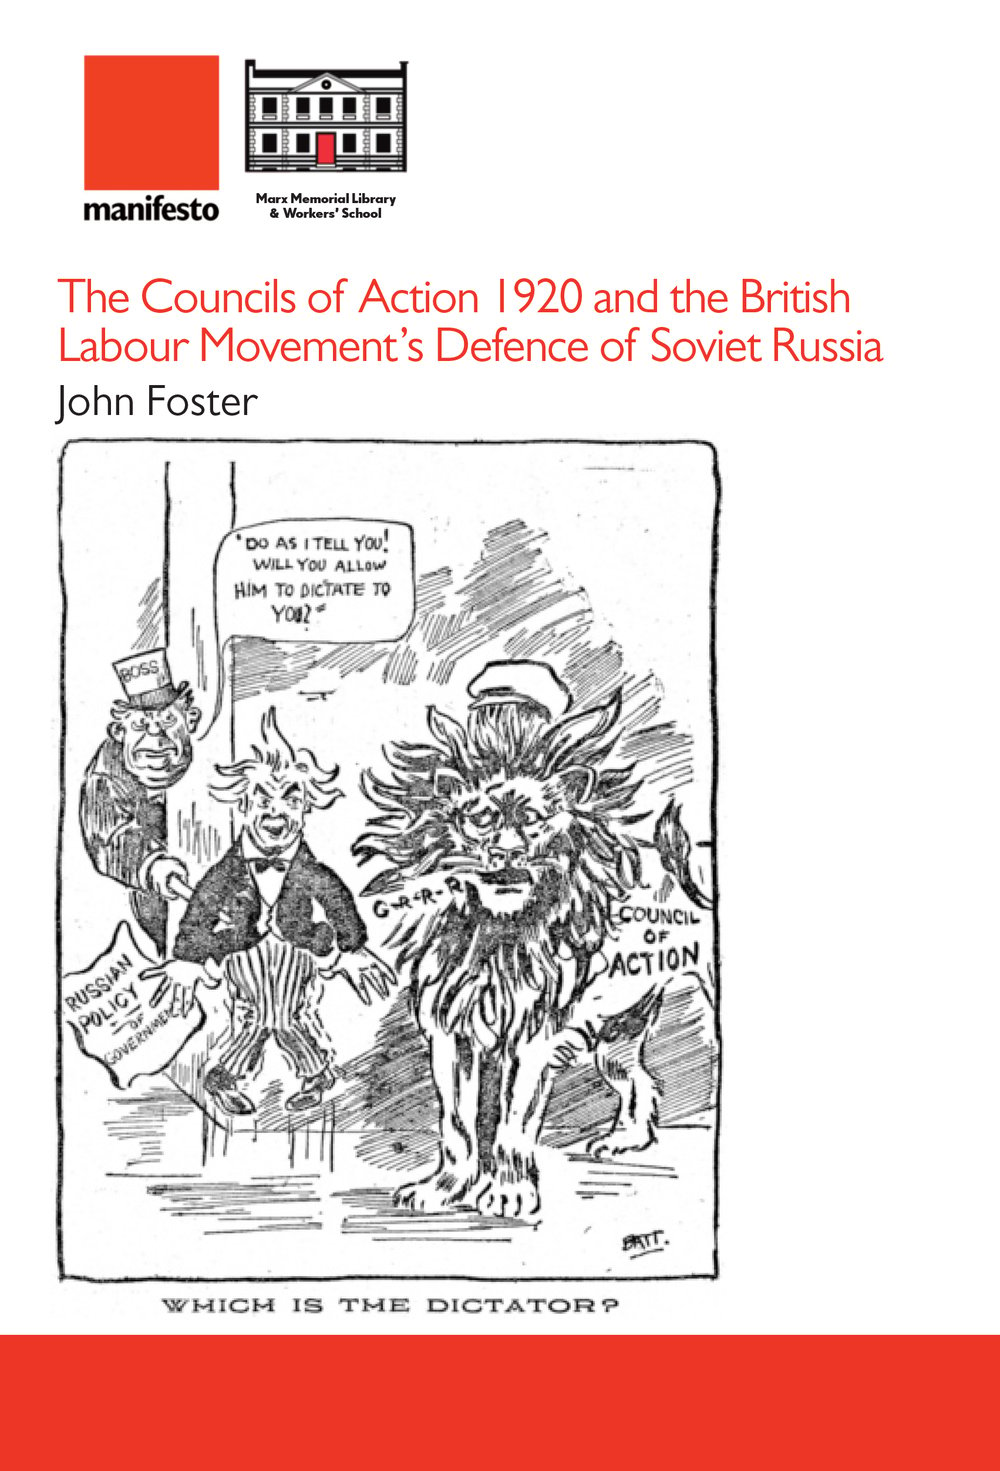 The Councils of Action 1920 and the British Labour Movement’s Defence of Soviet Russia